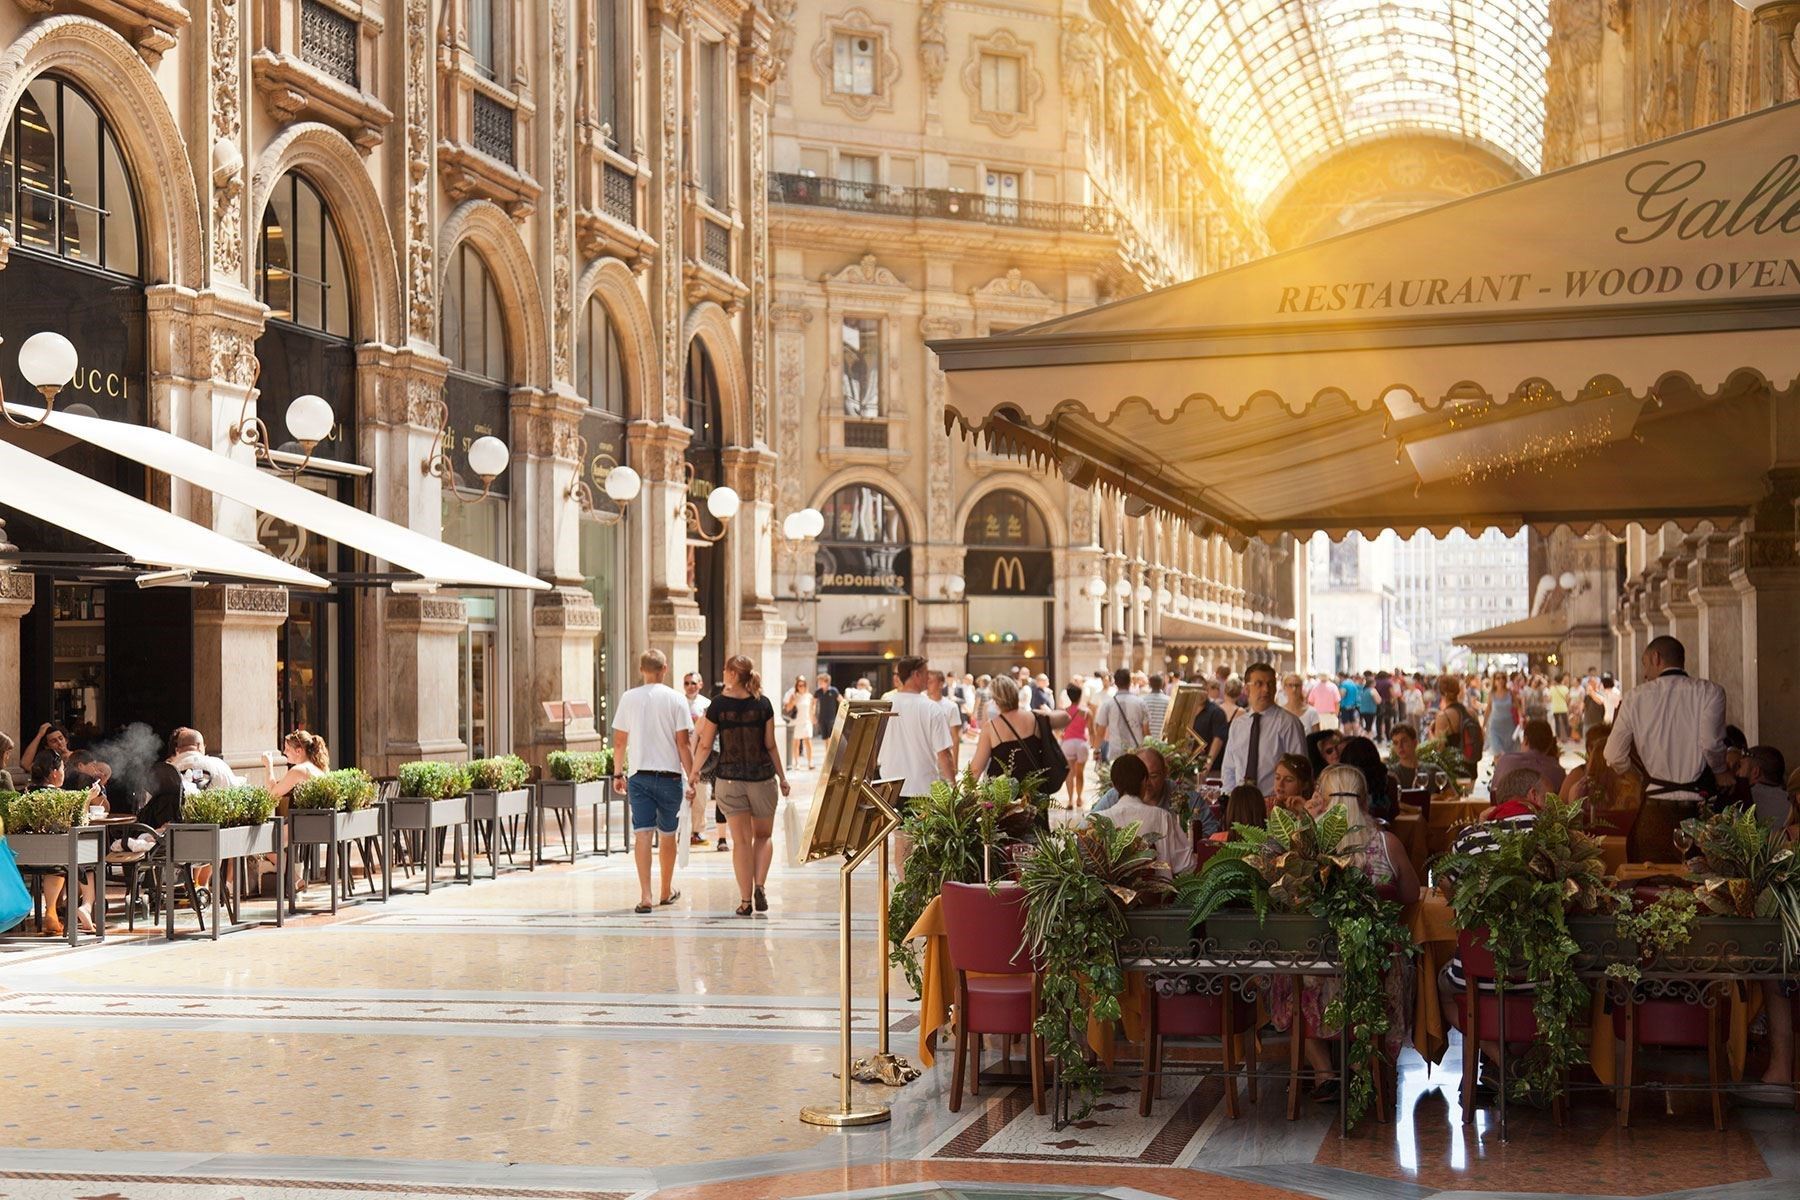 It may be one of the world's most important fashion capitals, but readers found it lacked "traditional Italian friendliness and hospitality". "Head south for the real beauty", one advised.